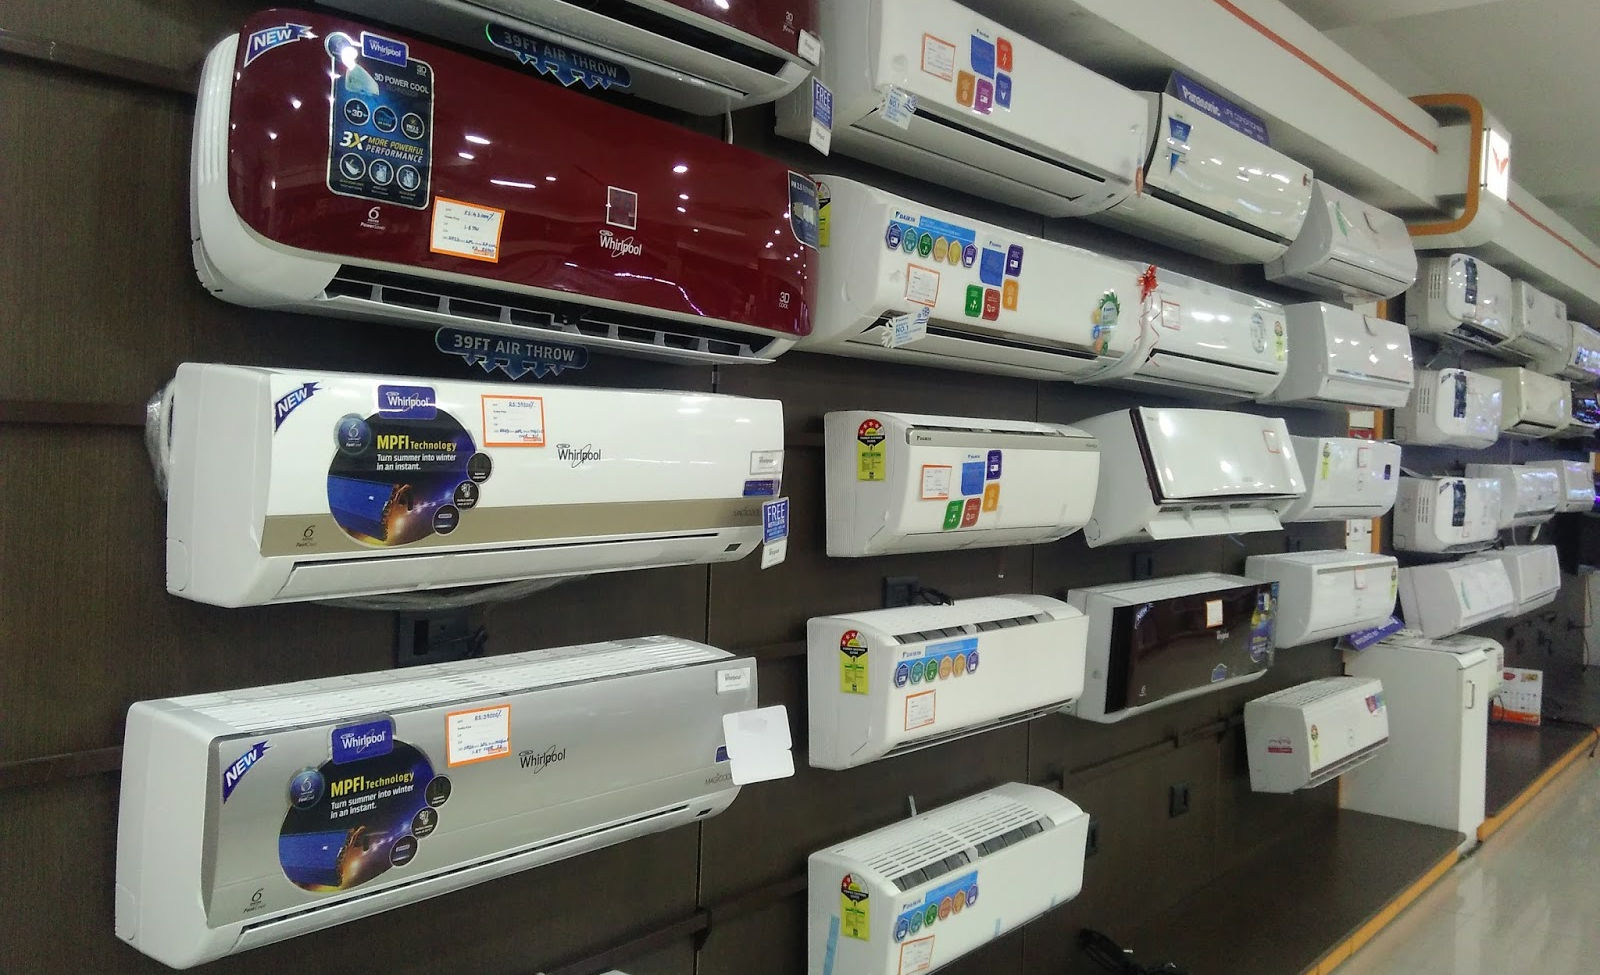 India's Best AC Brands: Our Top Picks for Reliable Air Conditioners